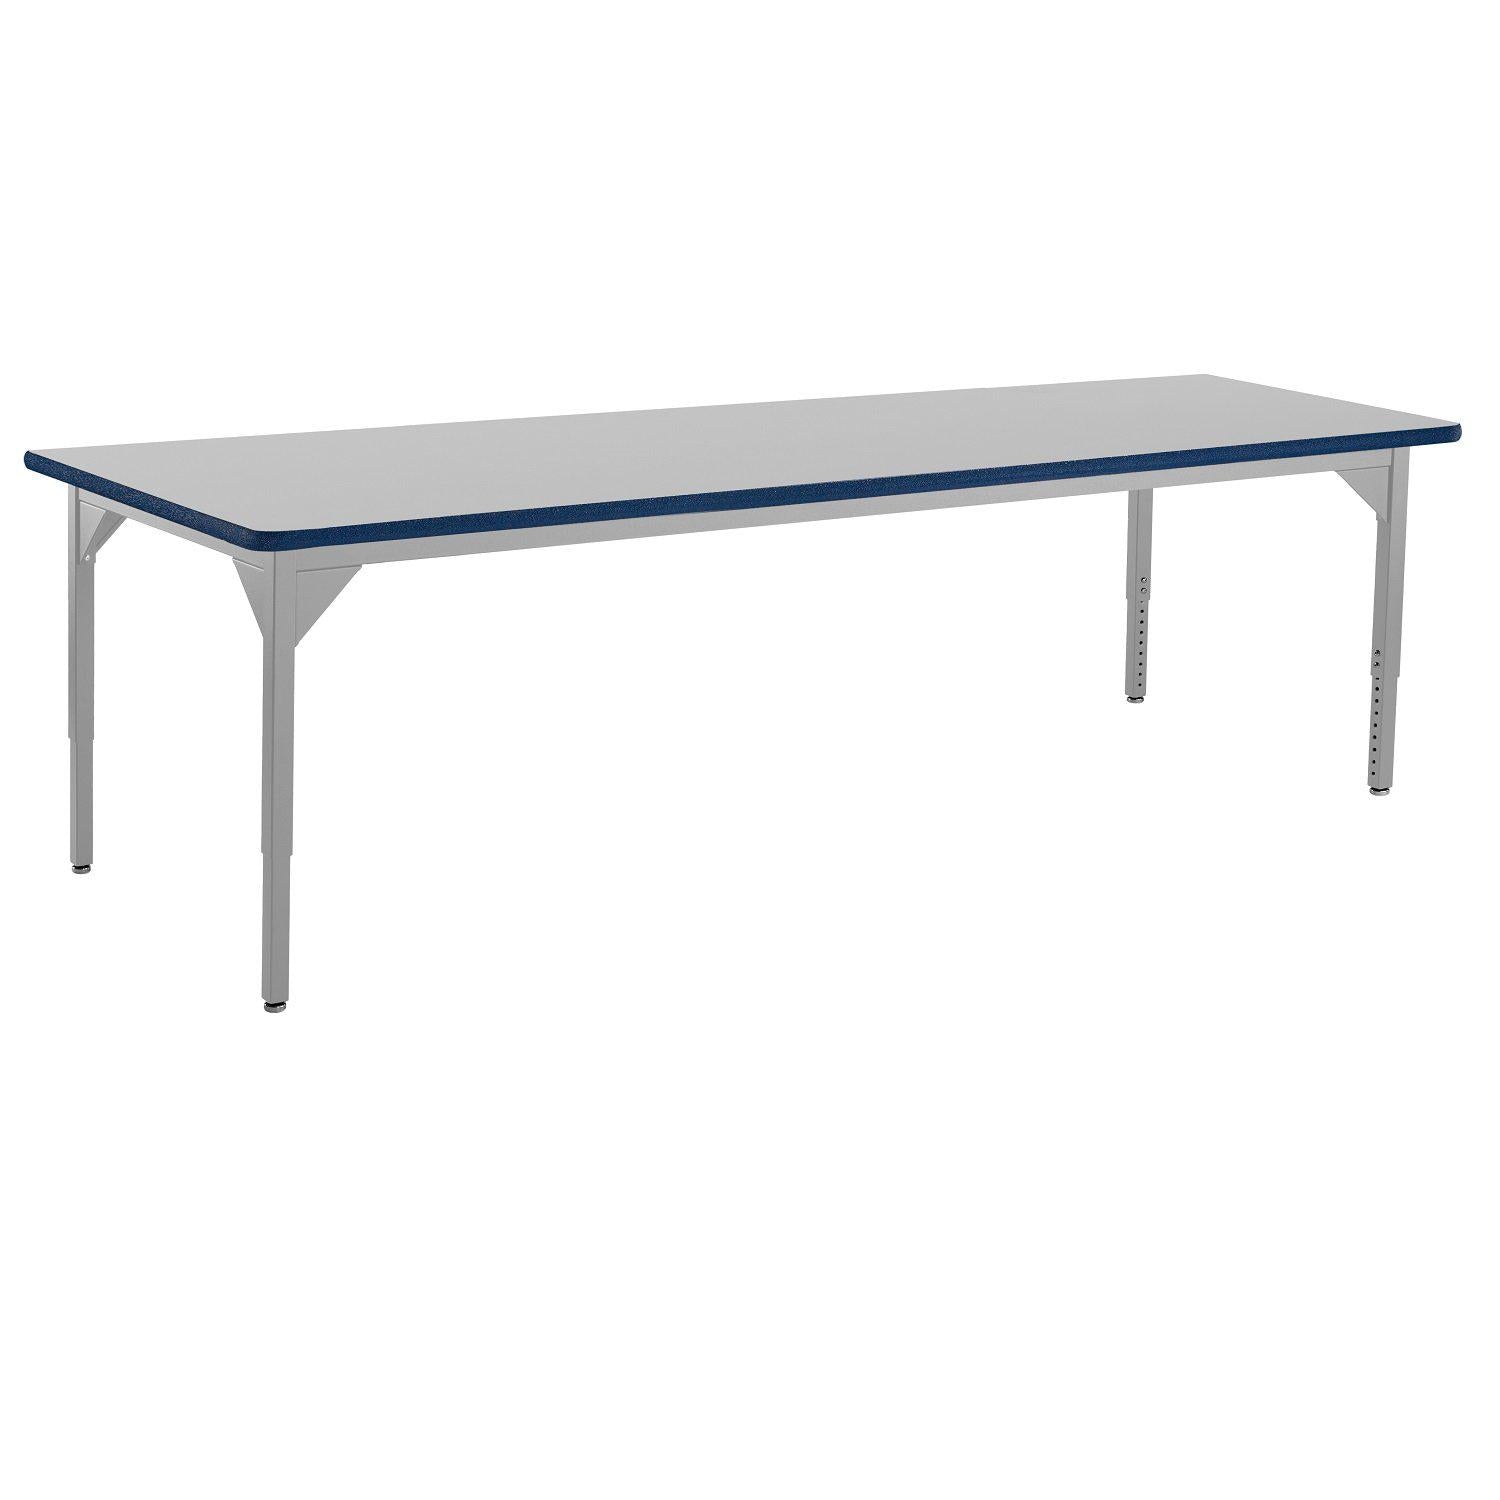 Heavy-Duty Height-Adjustable Utility Table, Soft Grey Frame, 48" x 72", Supreme High-Pressure Laminate Top with Black ProtectEdge